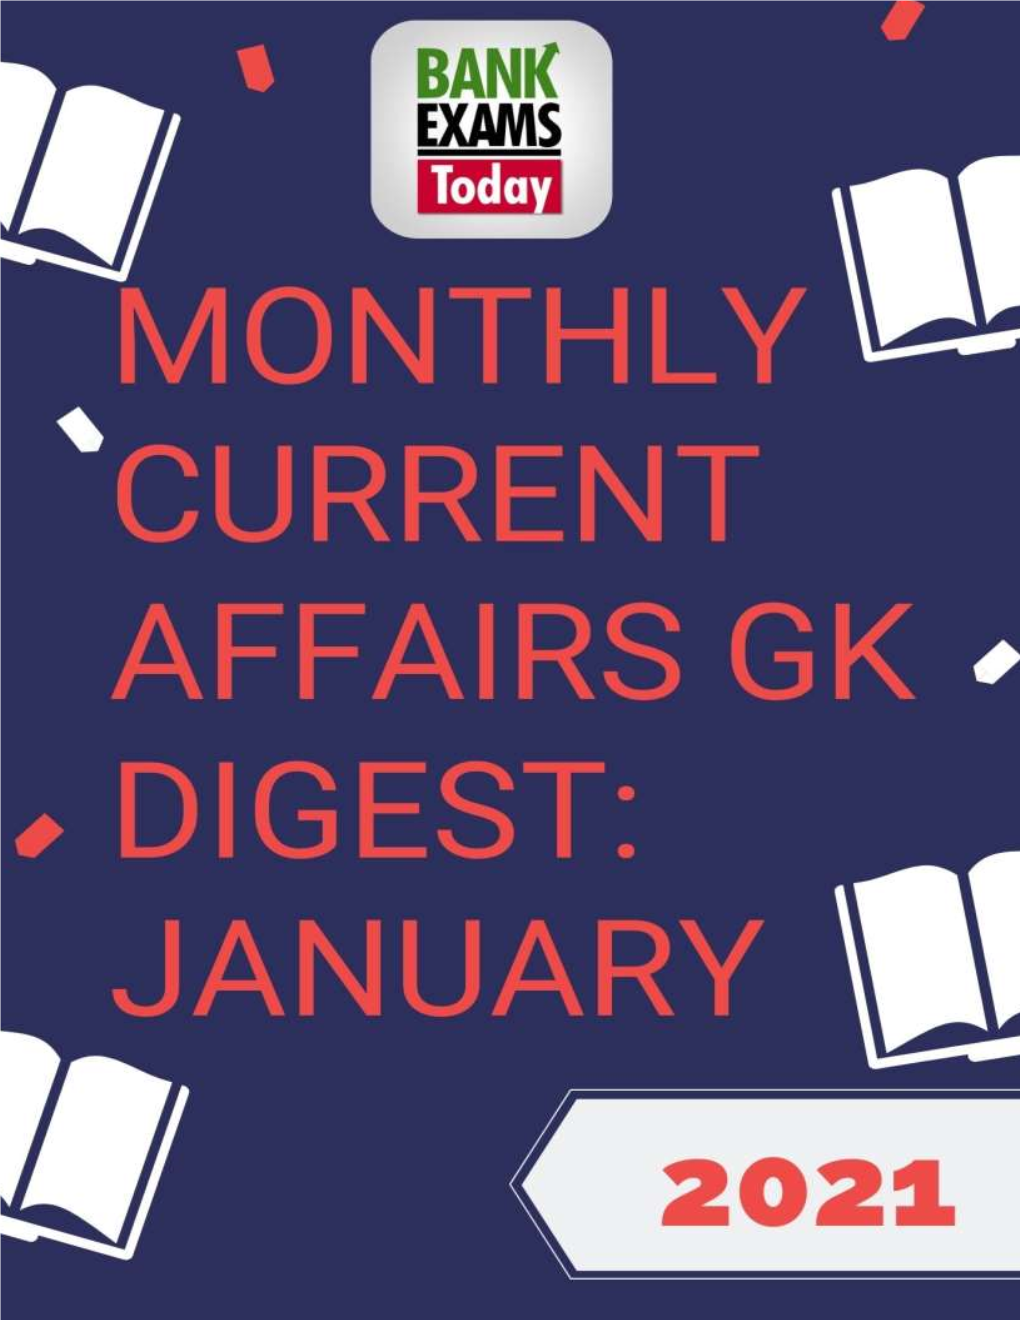 Monthly Current Affairs GK Digest: January 2021